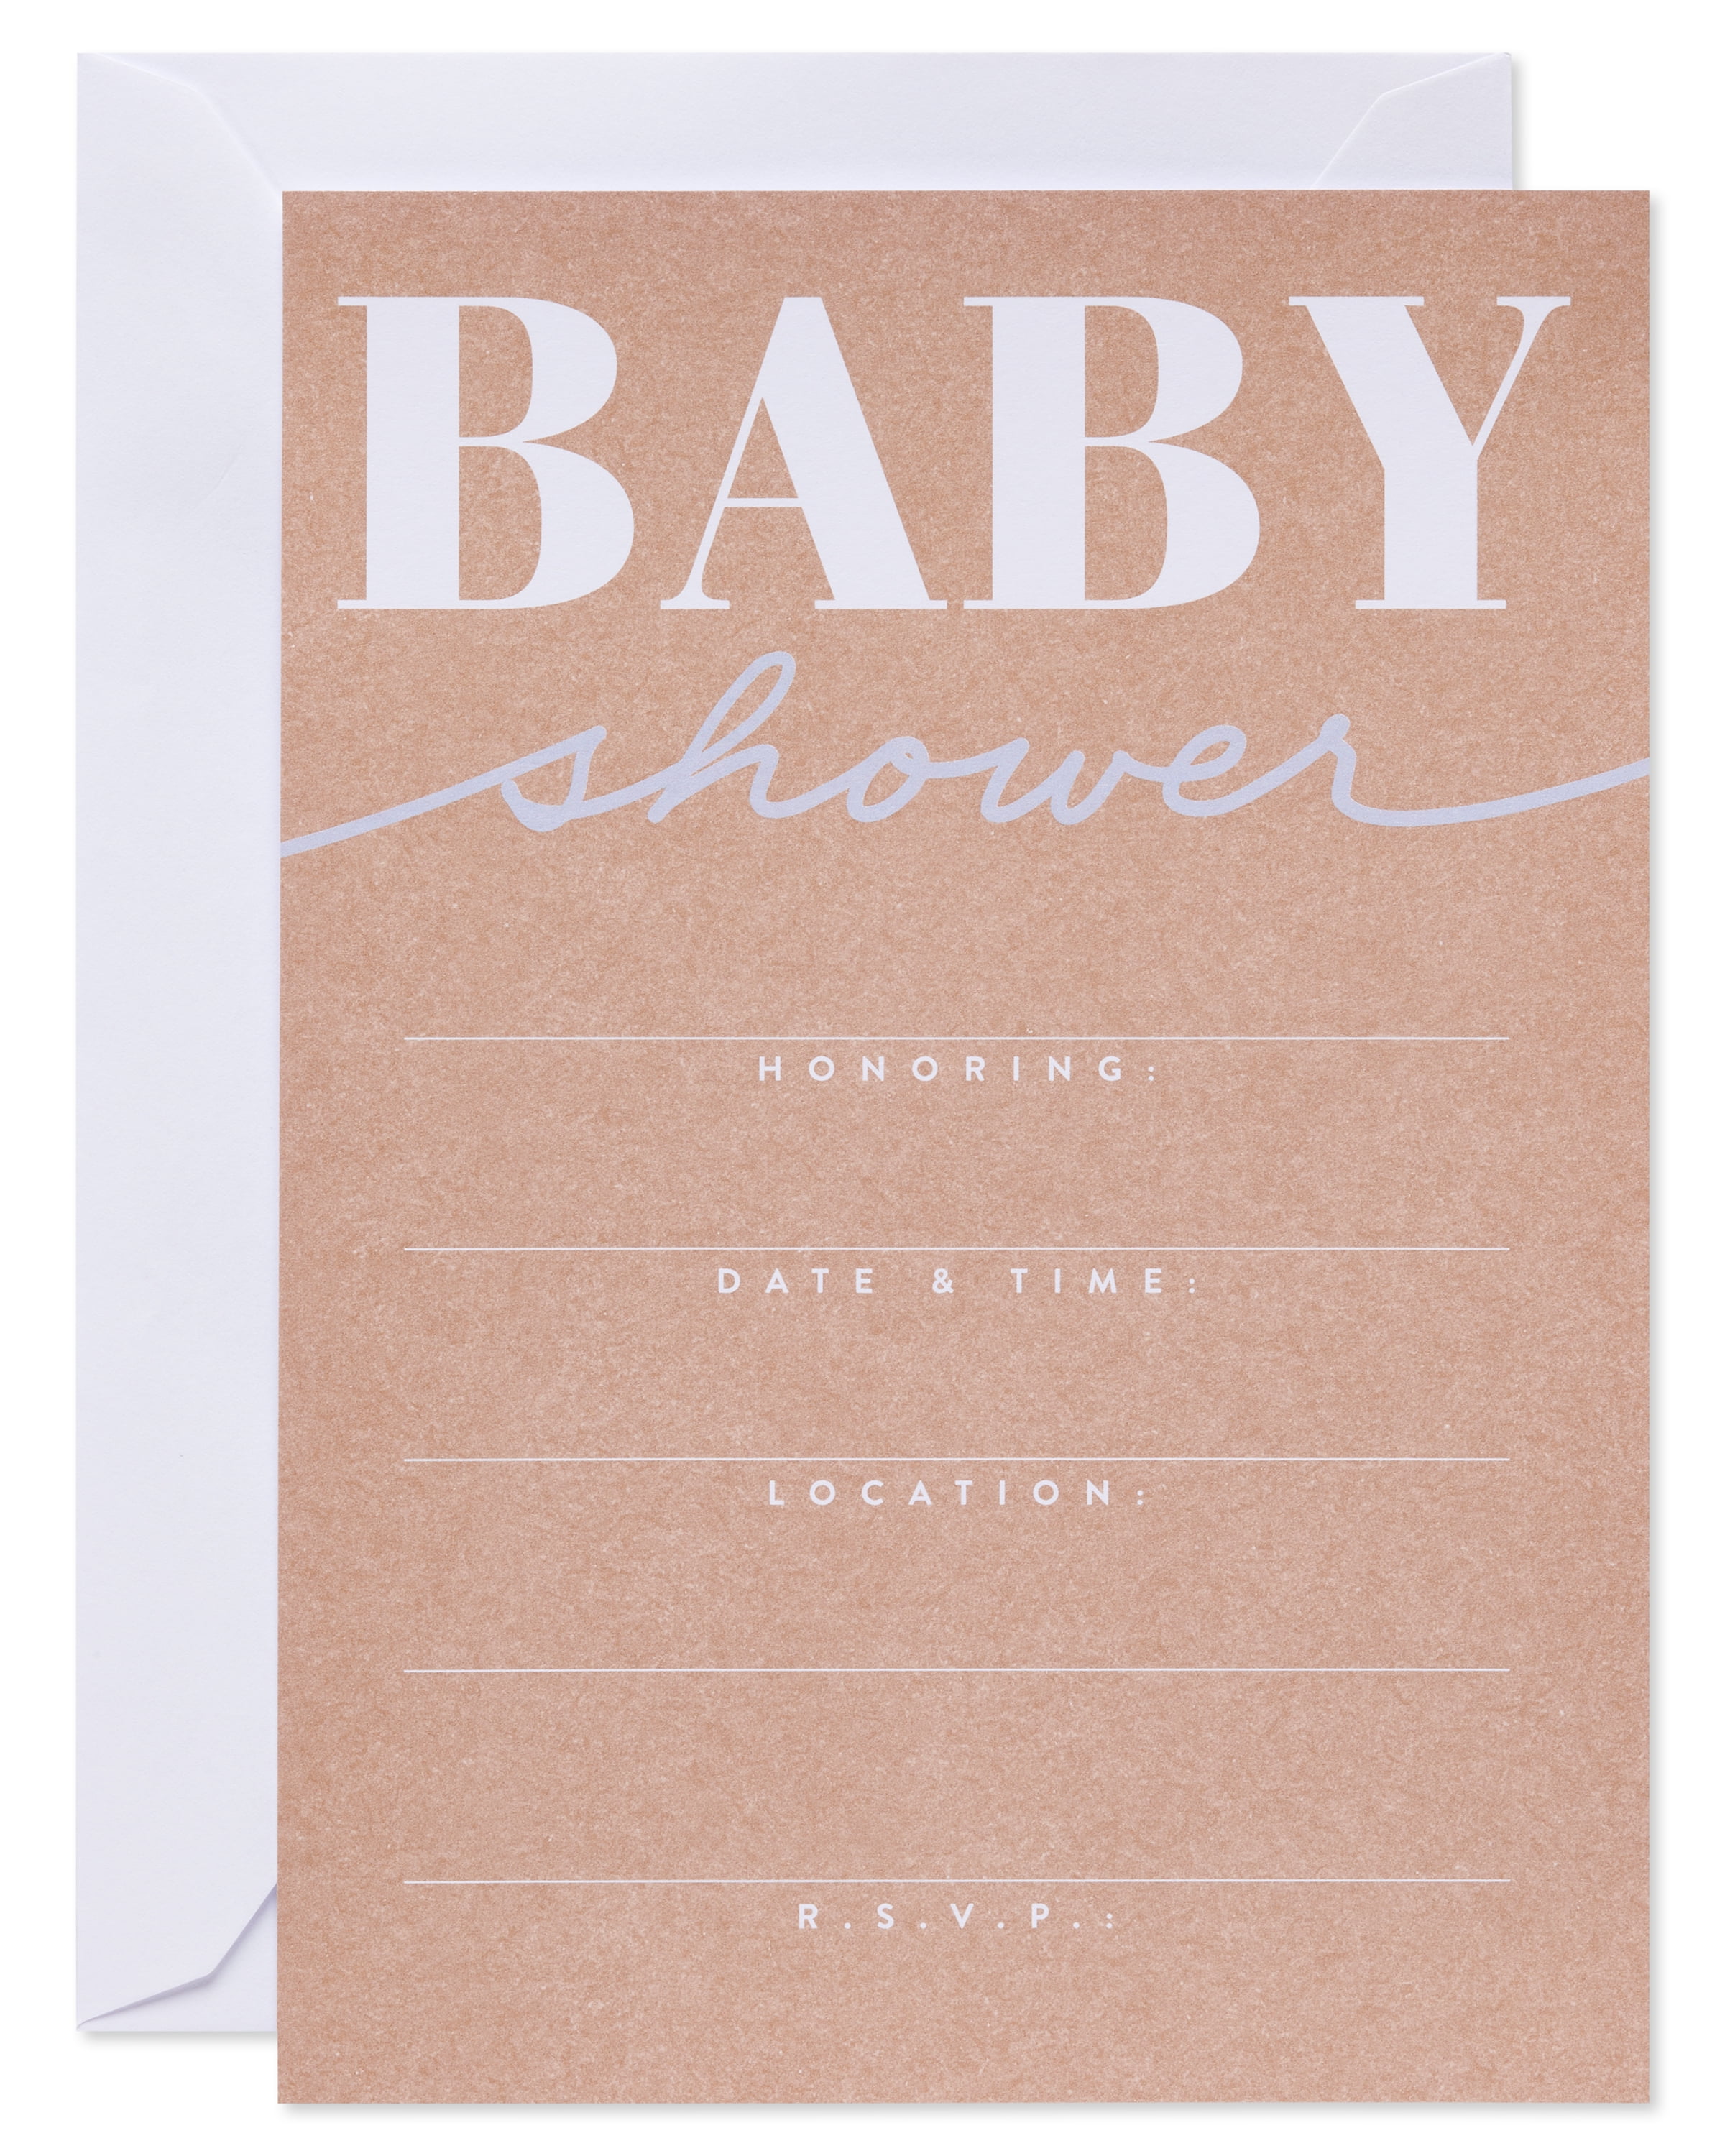 Blush Pink Gold Glitter Baby Shower Blank Invitations with Envelopes, 20ct